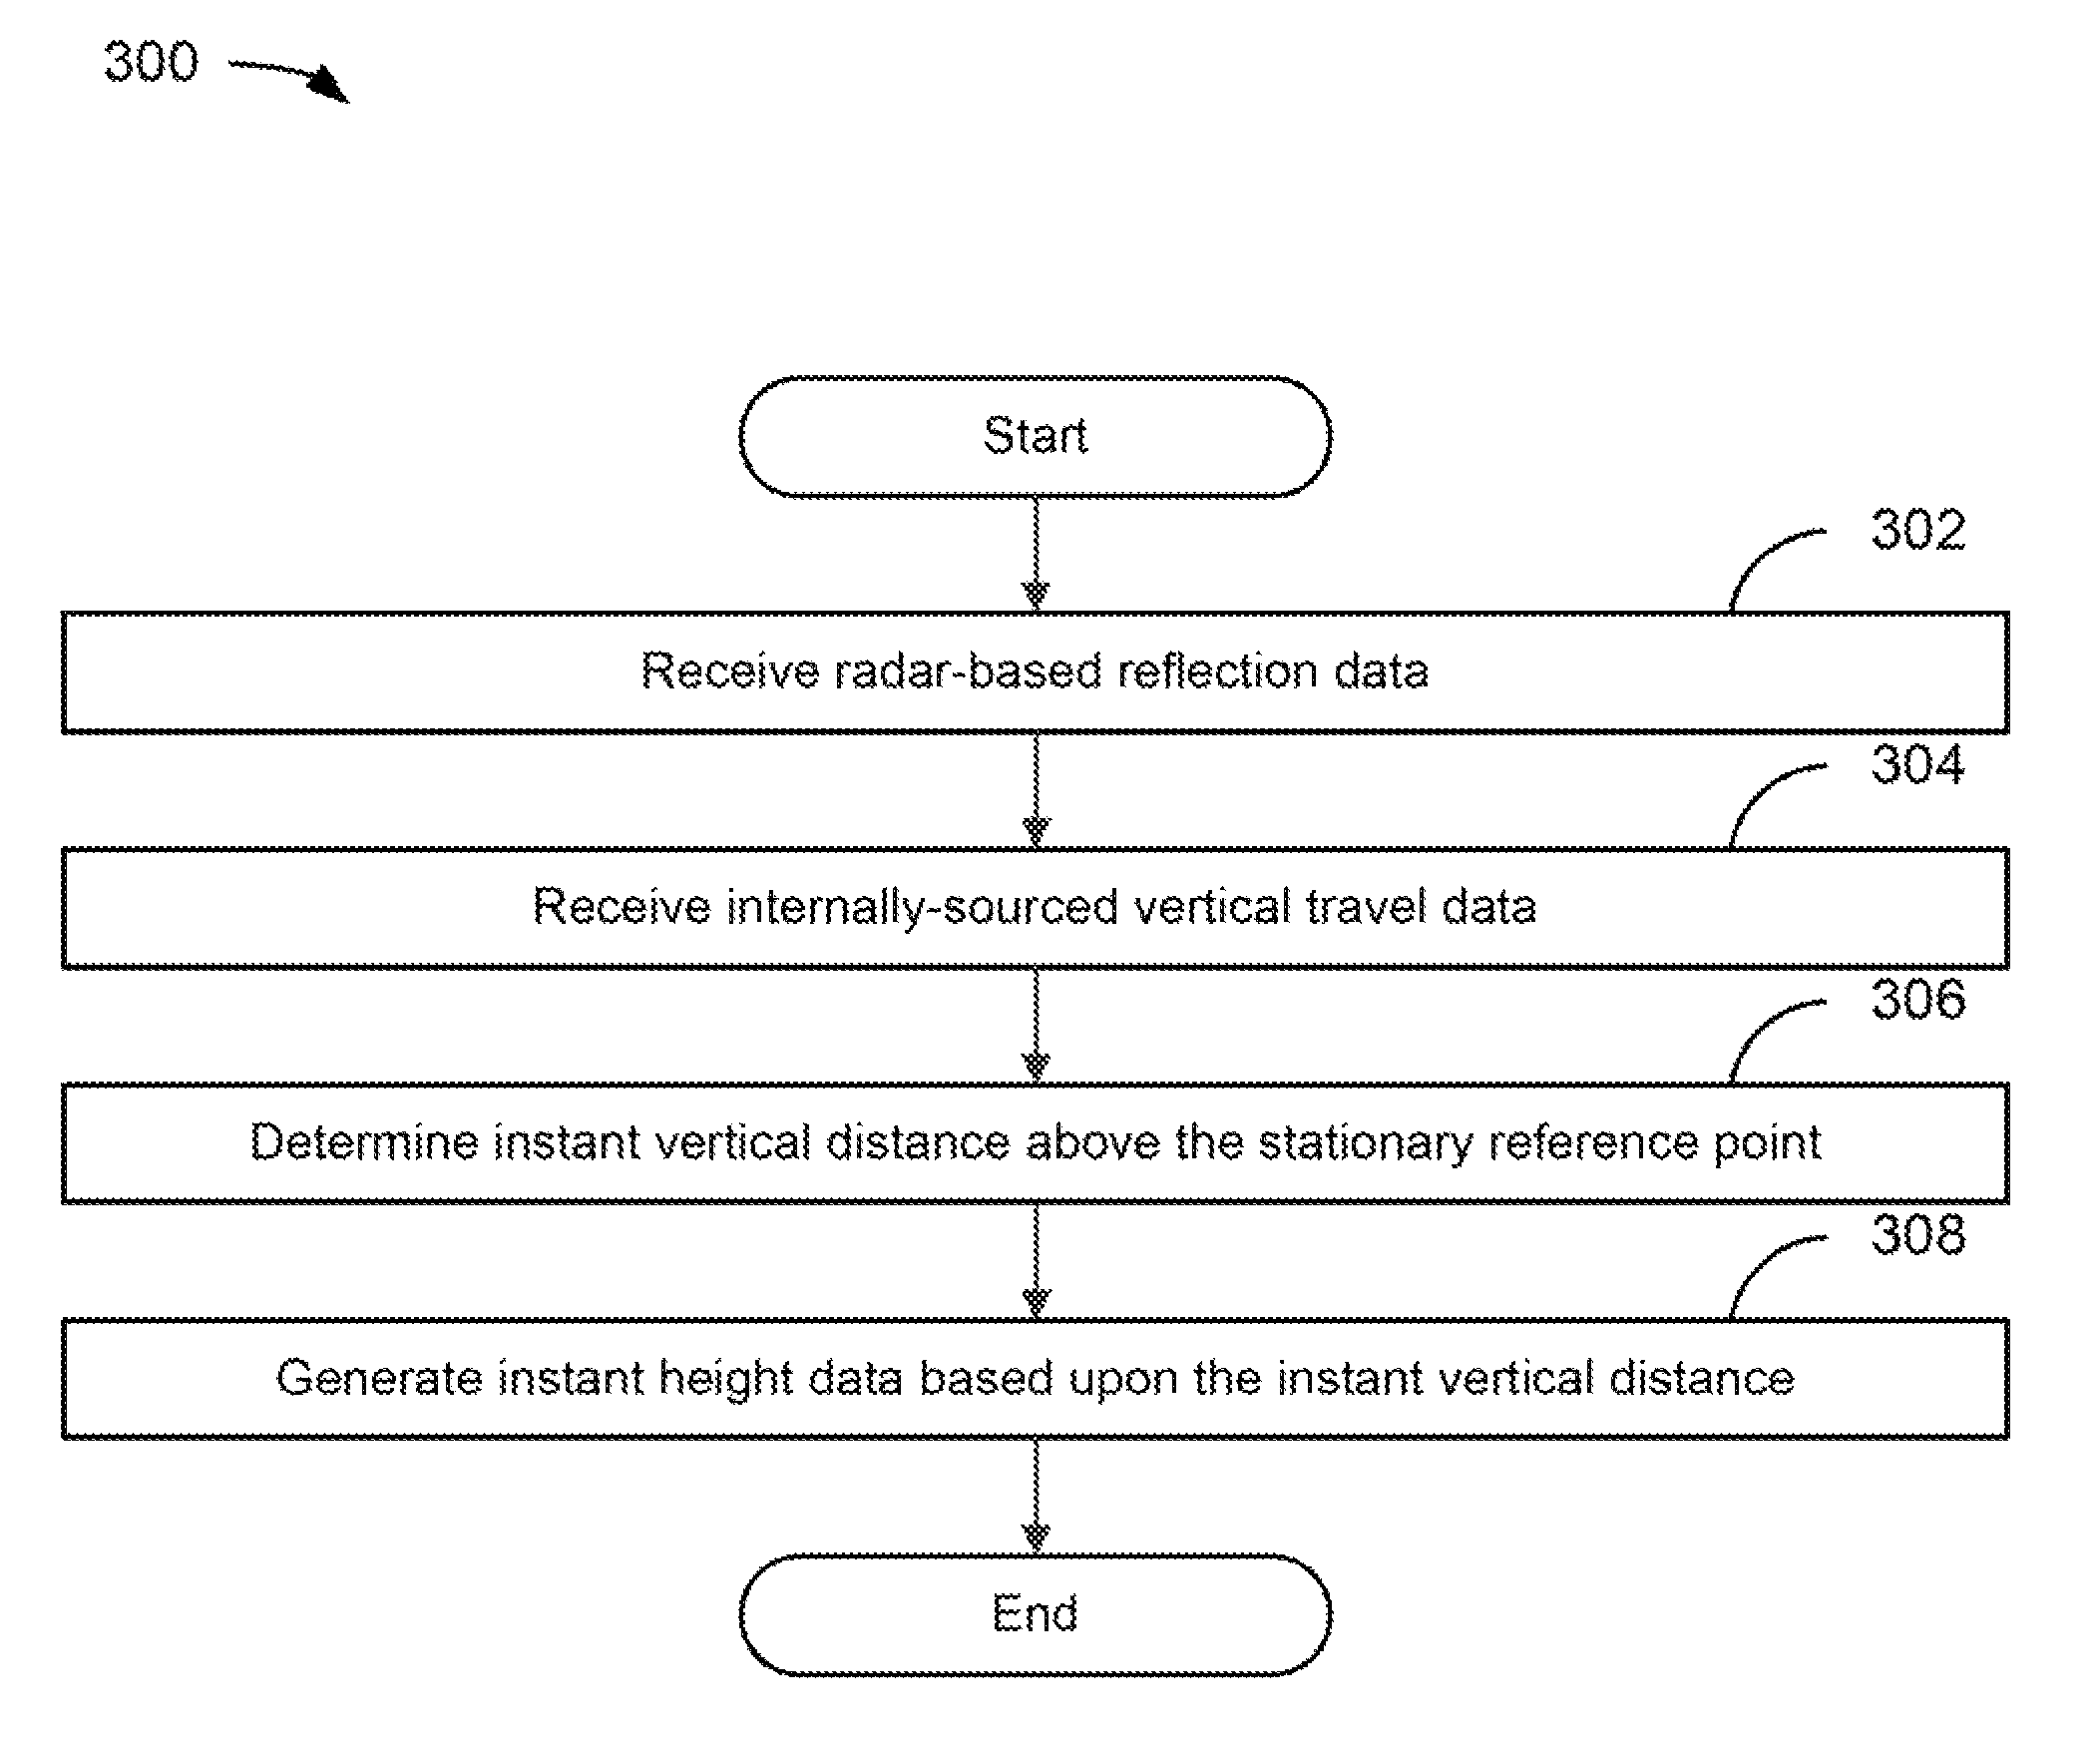 Systems and methods for generating aircraft height data and employing such height data to validate altitude data